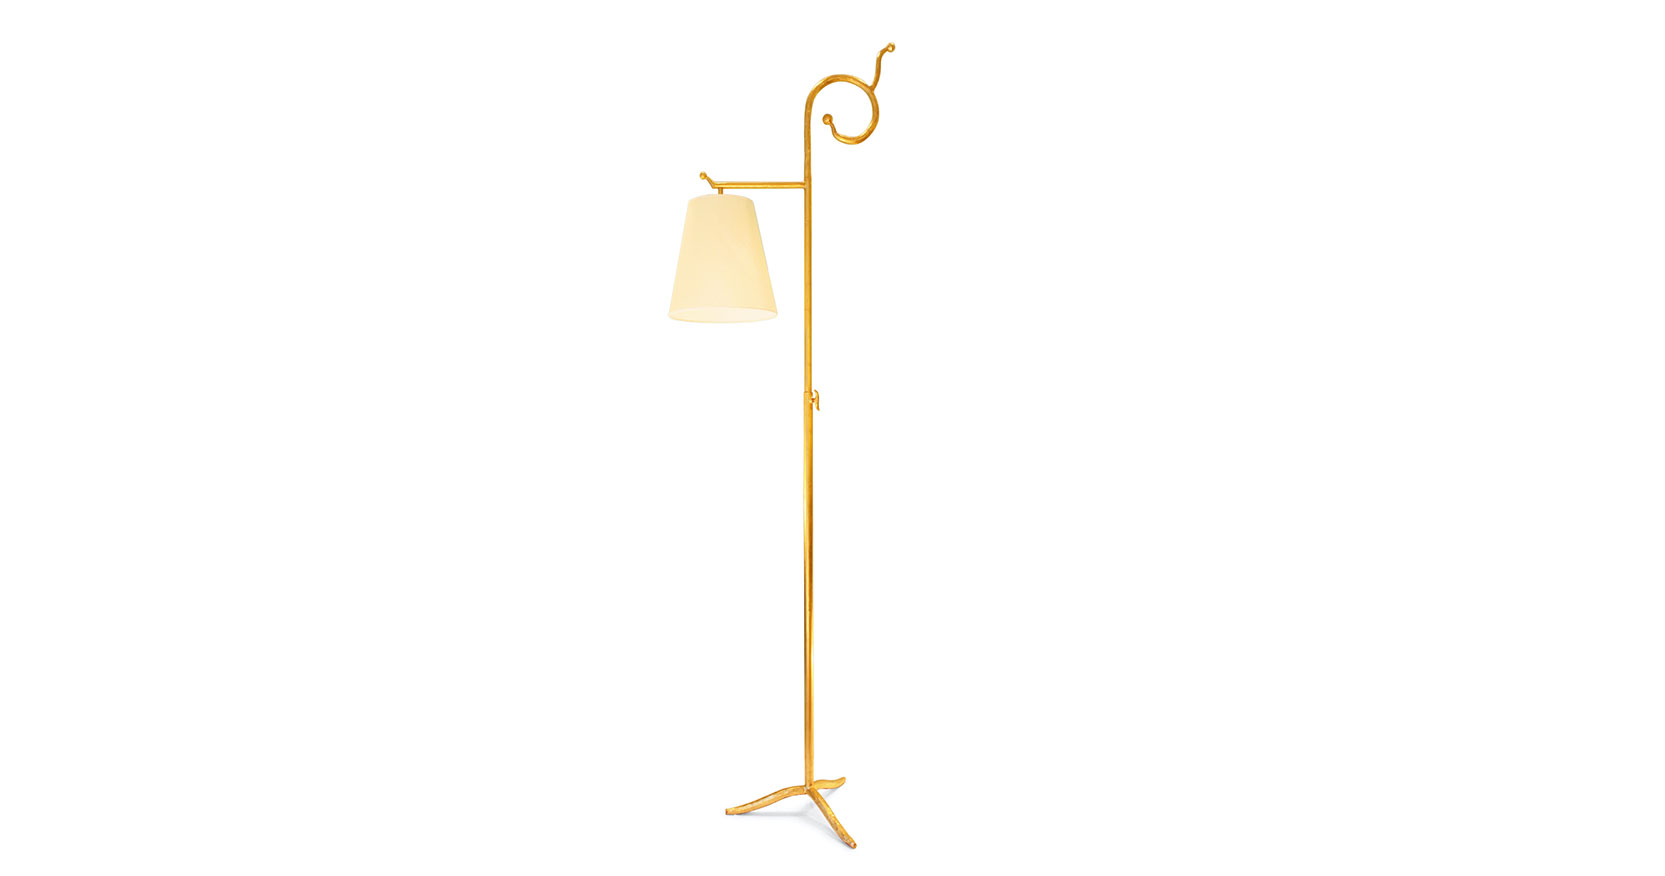 Garouste Bonetti, floor lamp in gilded wrought iron, 3 flattened curved legs, a straight stem that ends with a baroque curved shape, and a small horizontal rod from which a beige lampshade is suspended